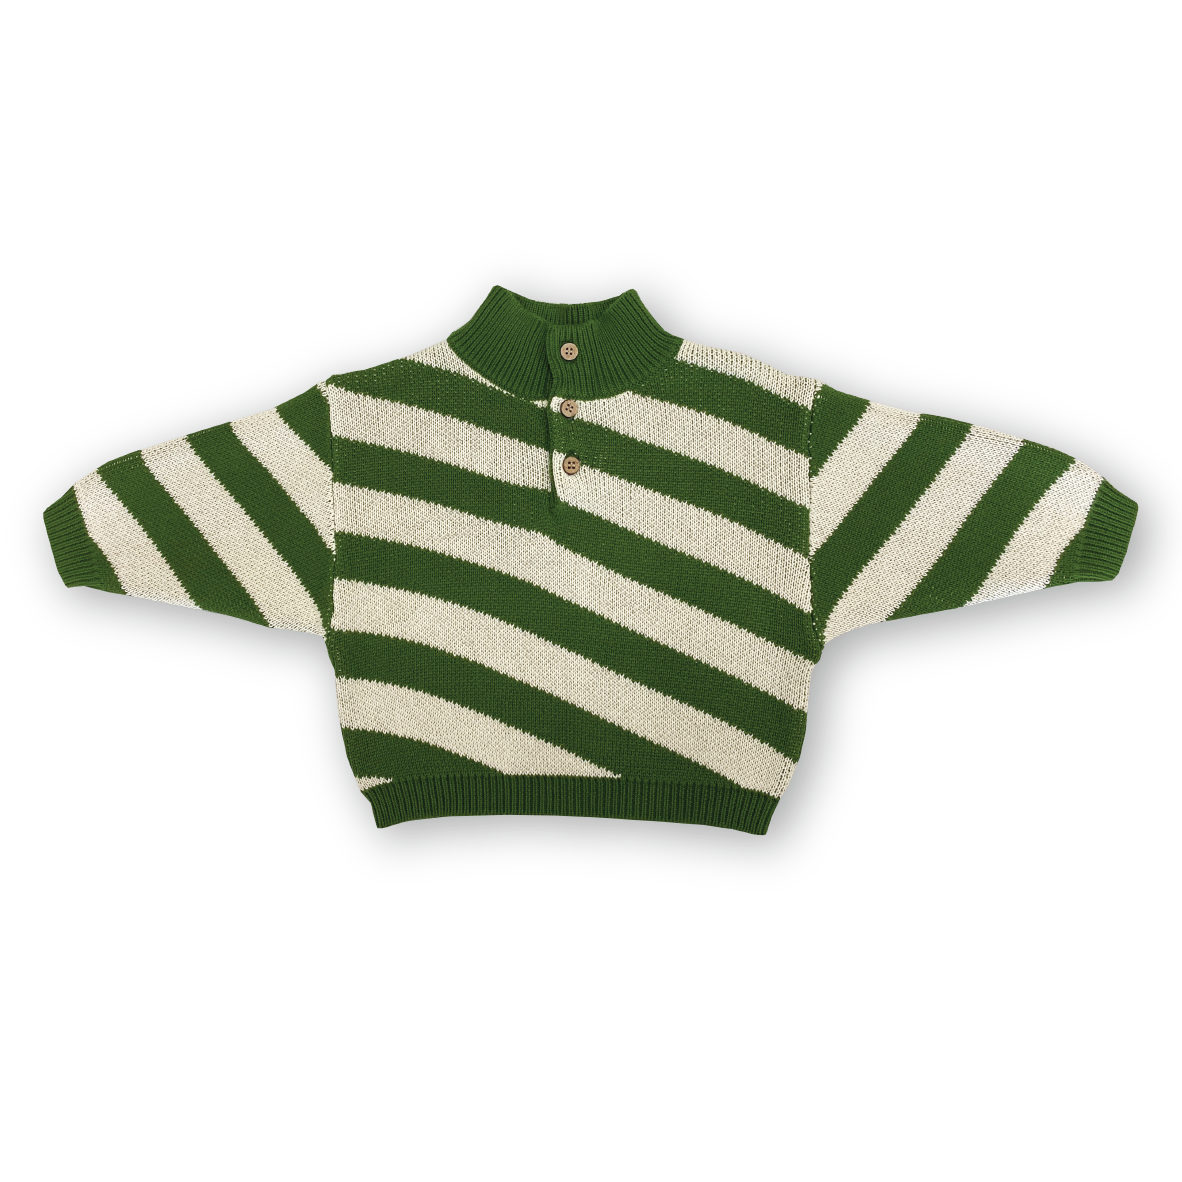 GROWN BUTTON UP DIAGONAL STRIPE PULL OVER: VERDE